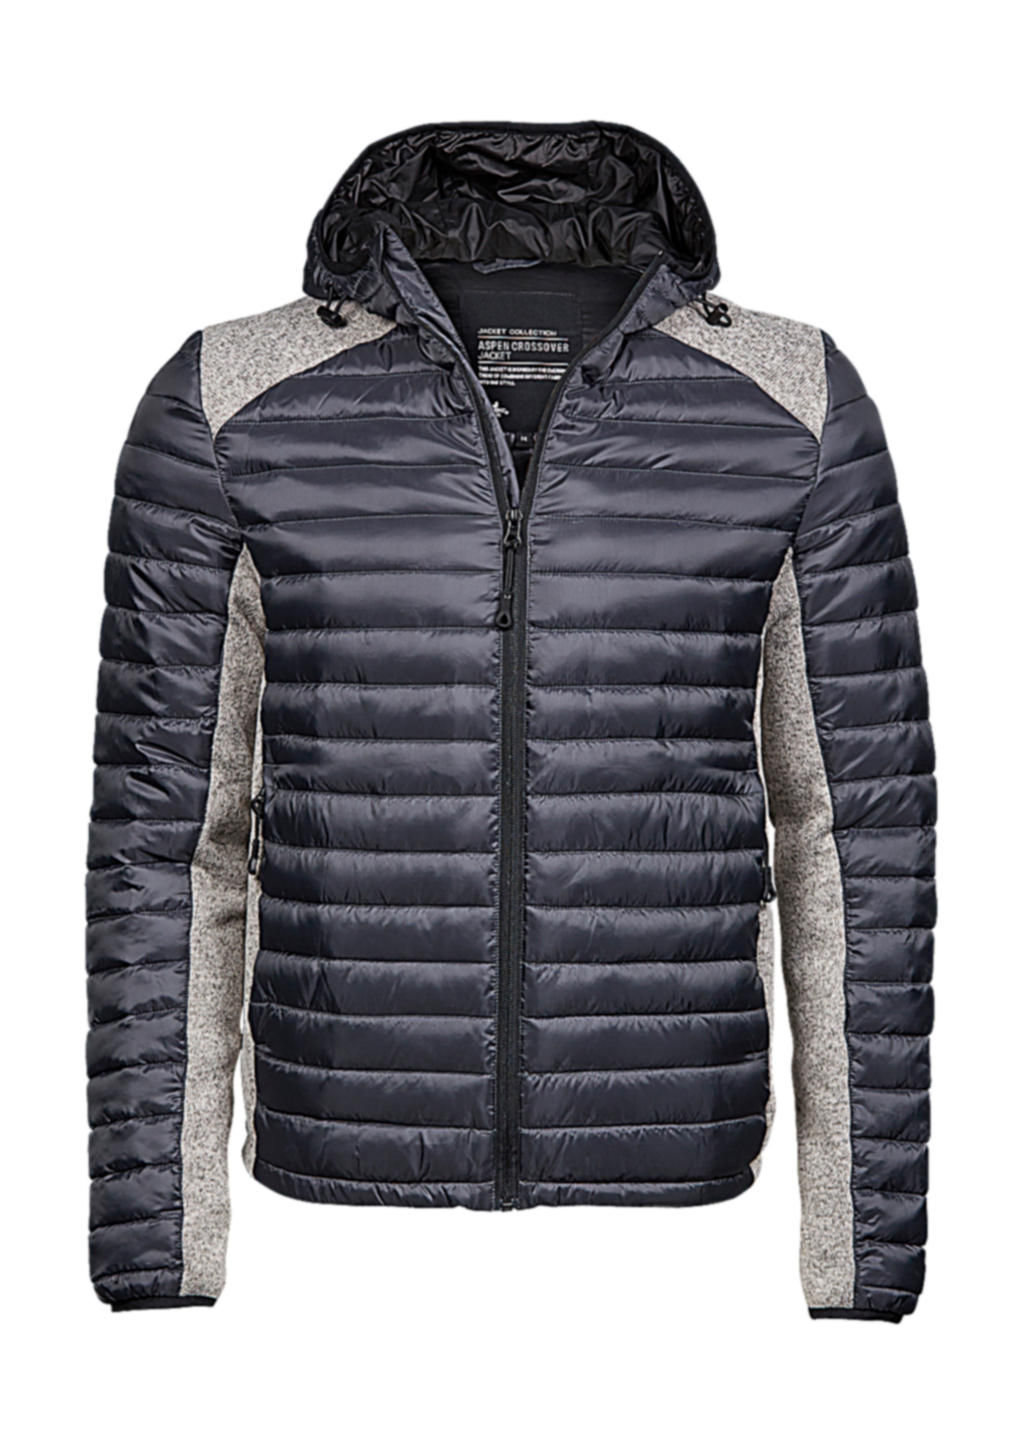  Hooded Outdoor Crossover Jacket in Farbe Space Grey/Grey Melange